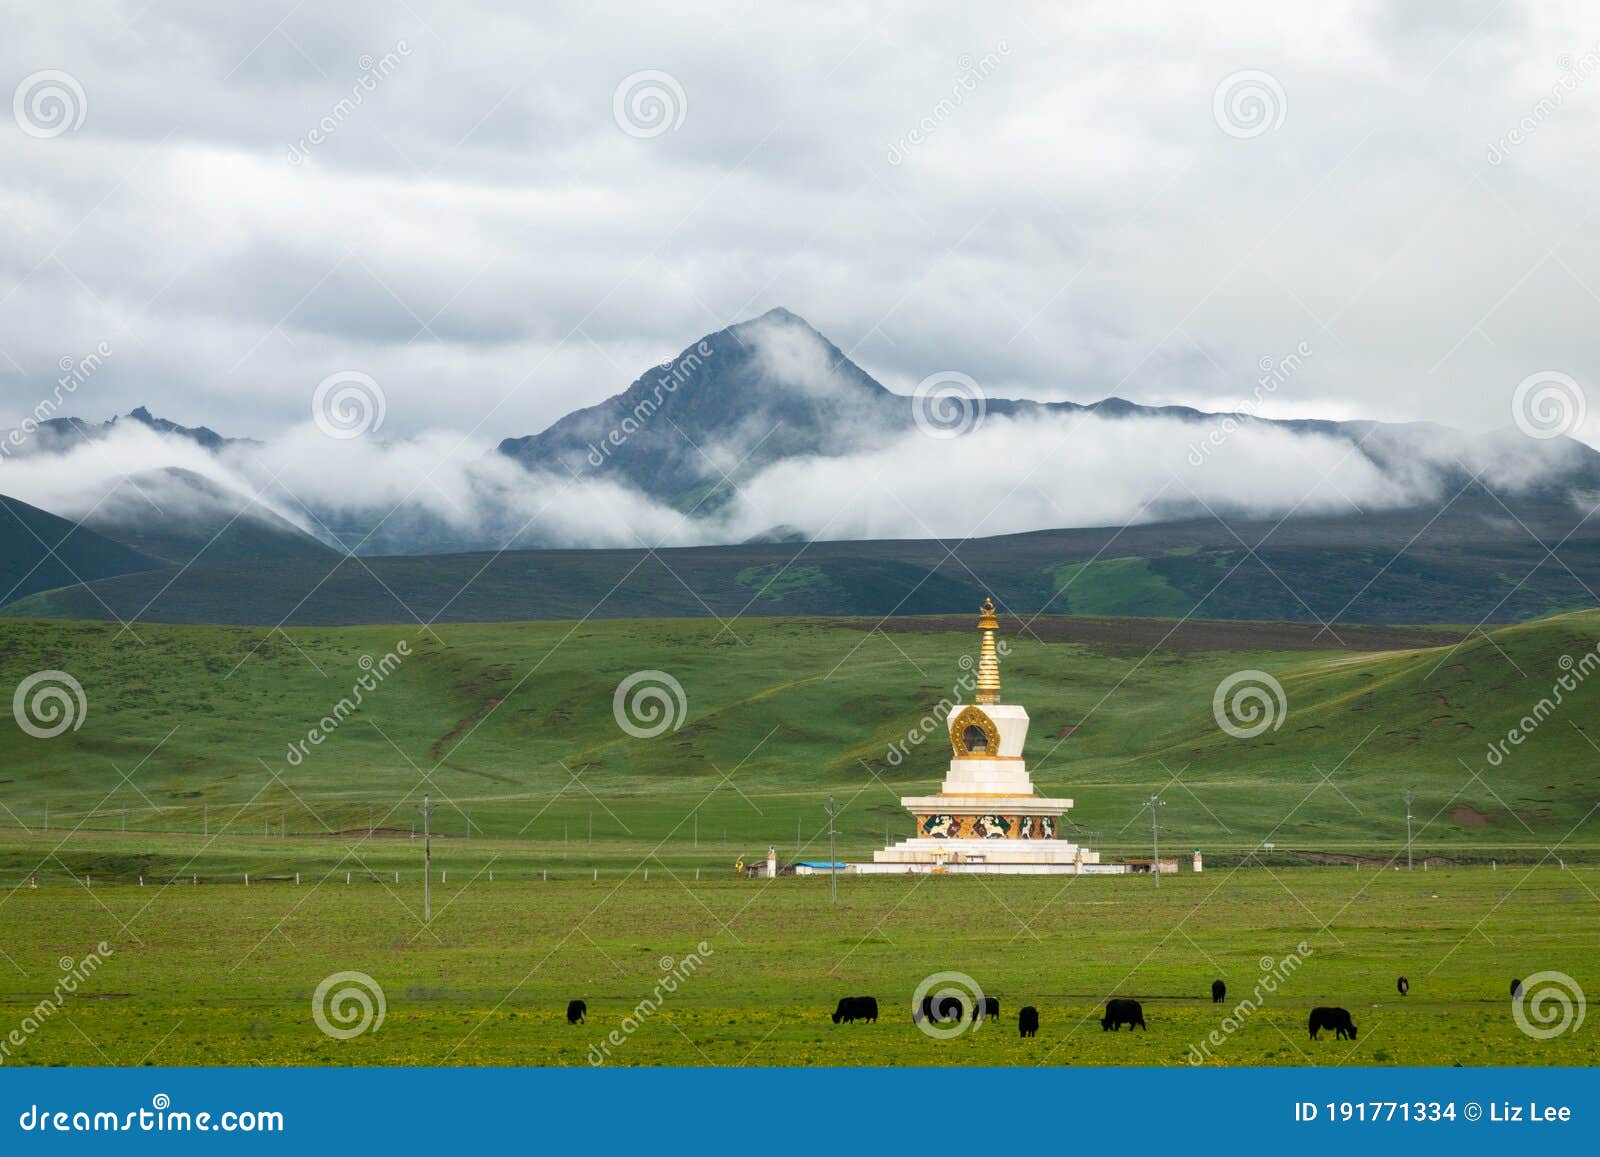 the white pagoda of tibetan buddhism on the grassland at the foot of the snow-capped mountains